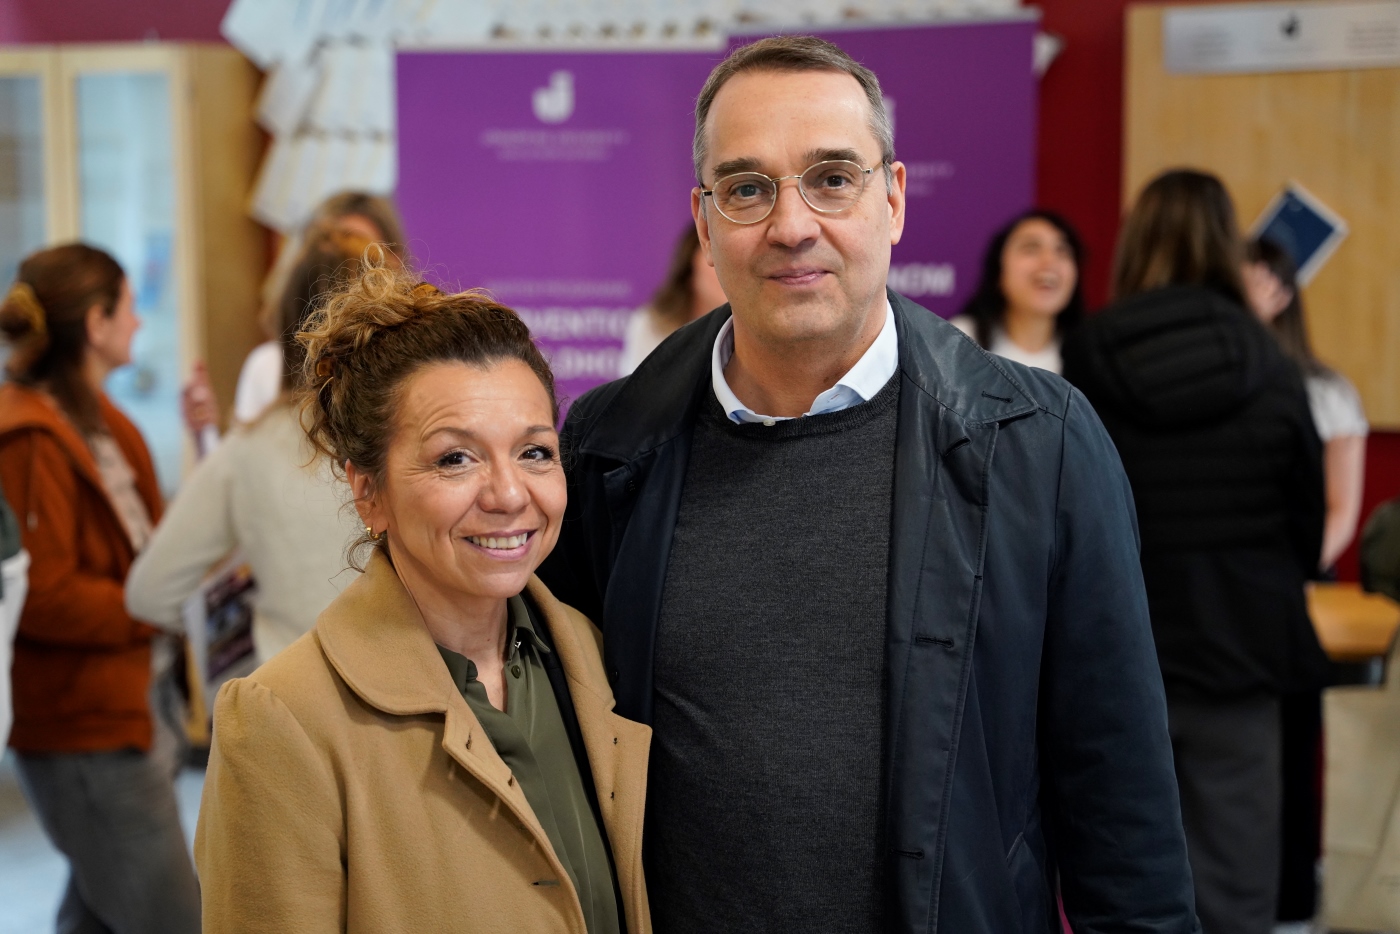 Måns Svensson, who will take office as the new President of Jönköping University in April, visited the Open house with his wife Lupita.